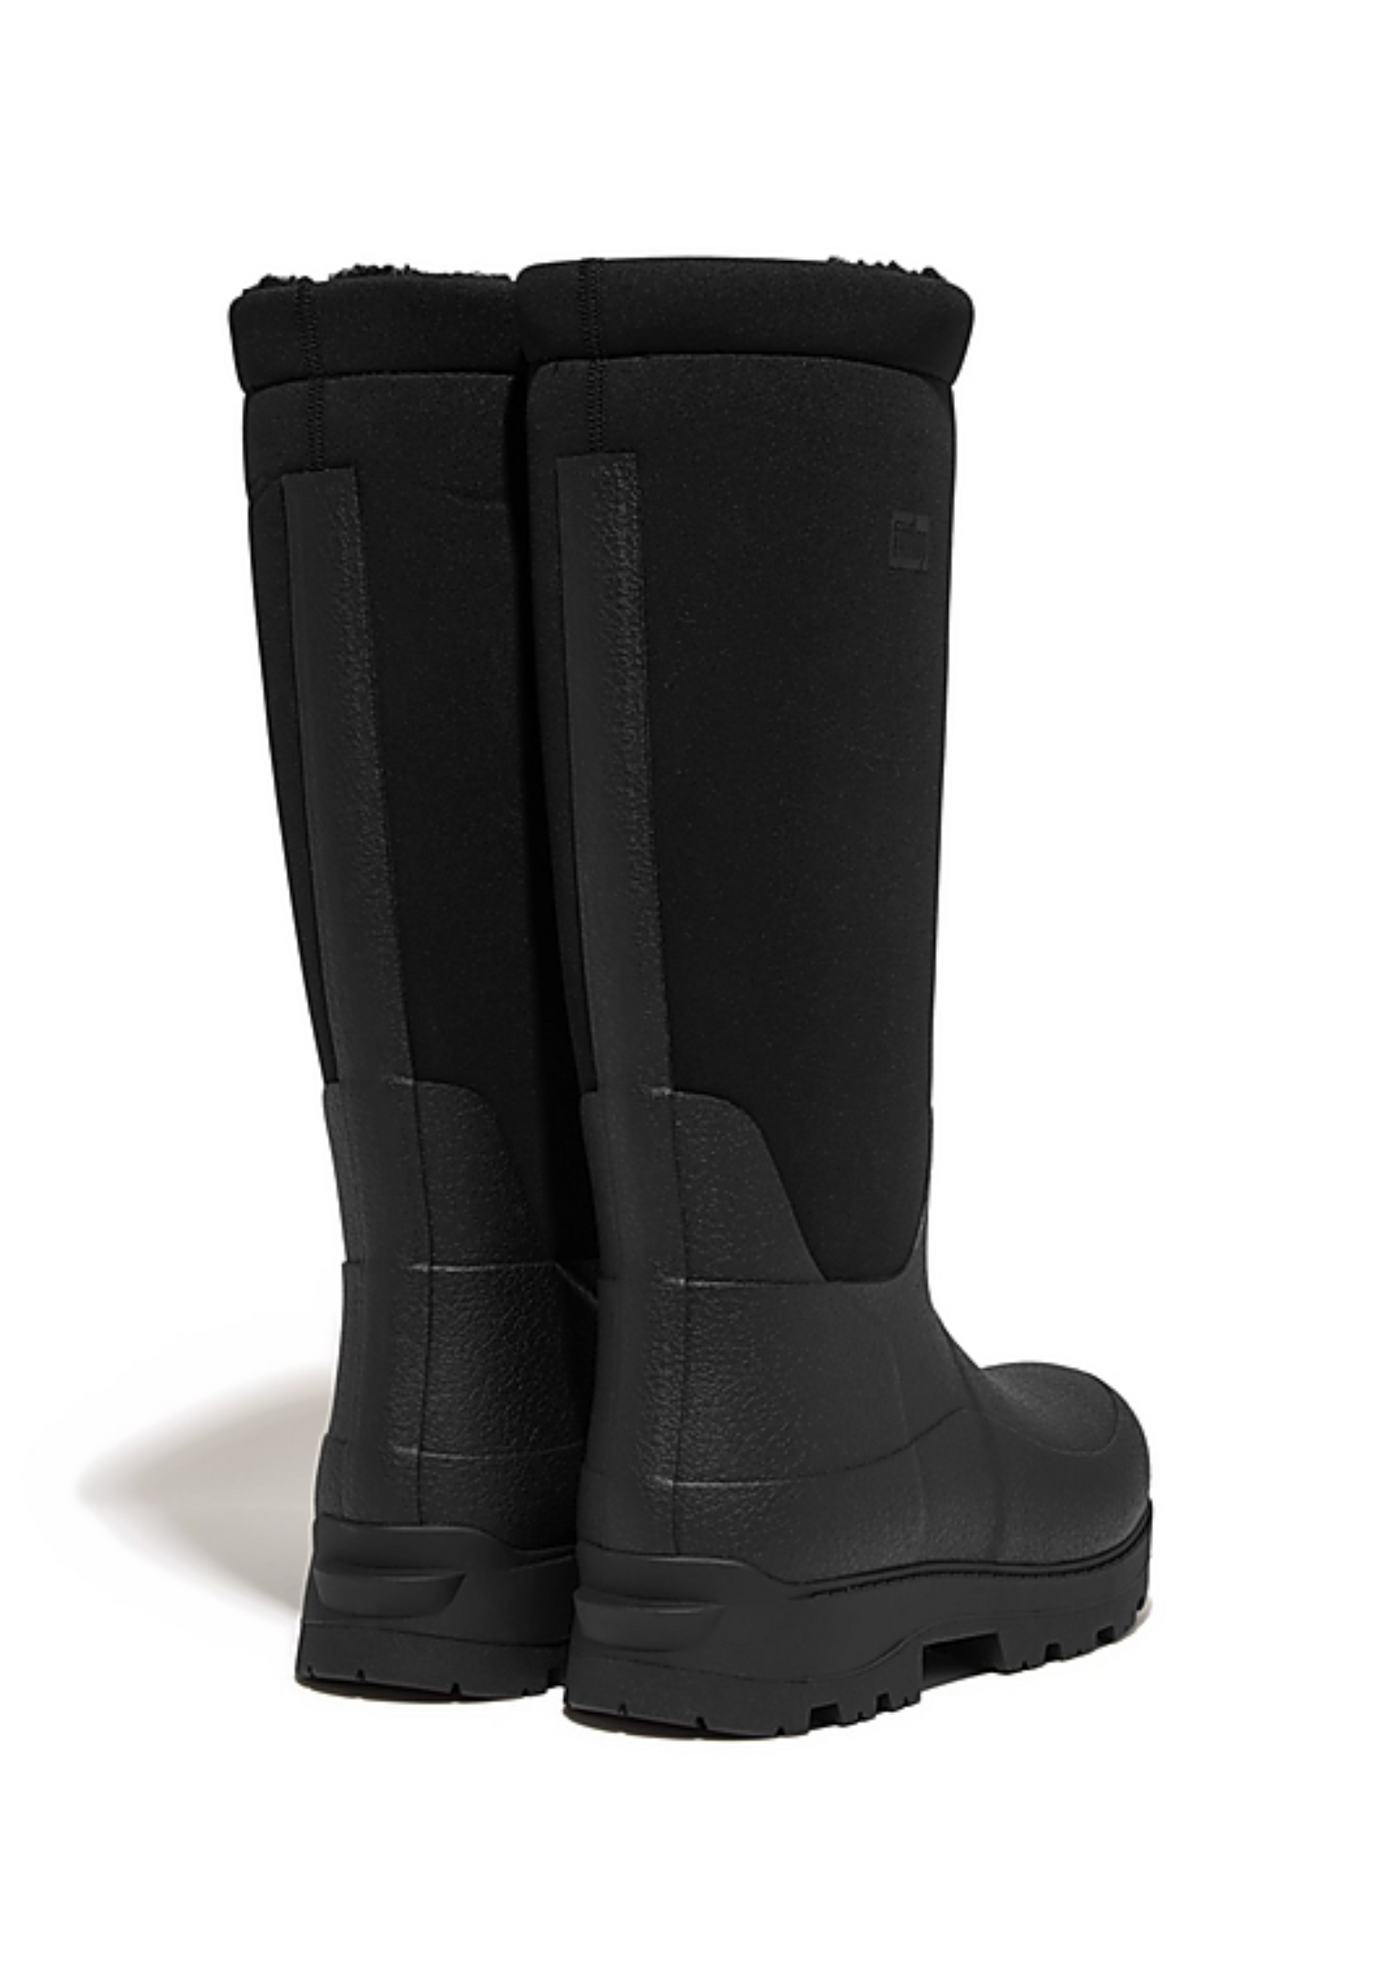 Fitflop - Wonderwelly ATB Fleece Lined Roll Down Rain Boots